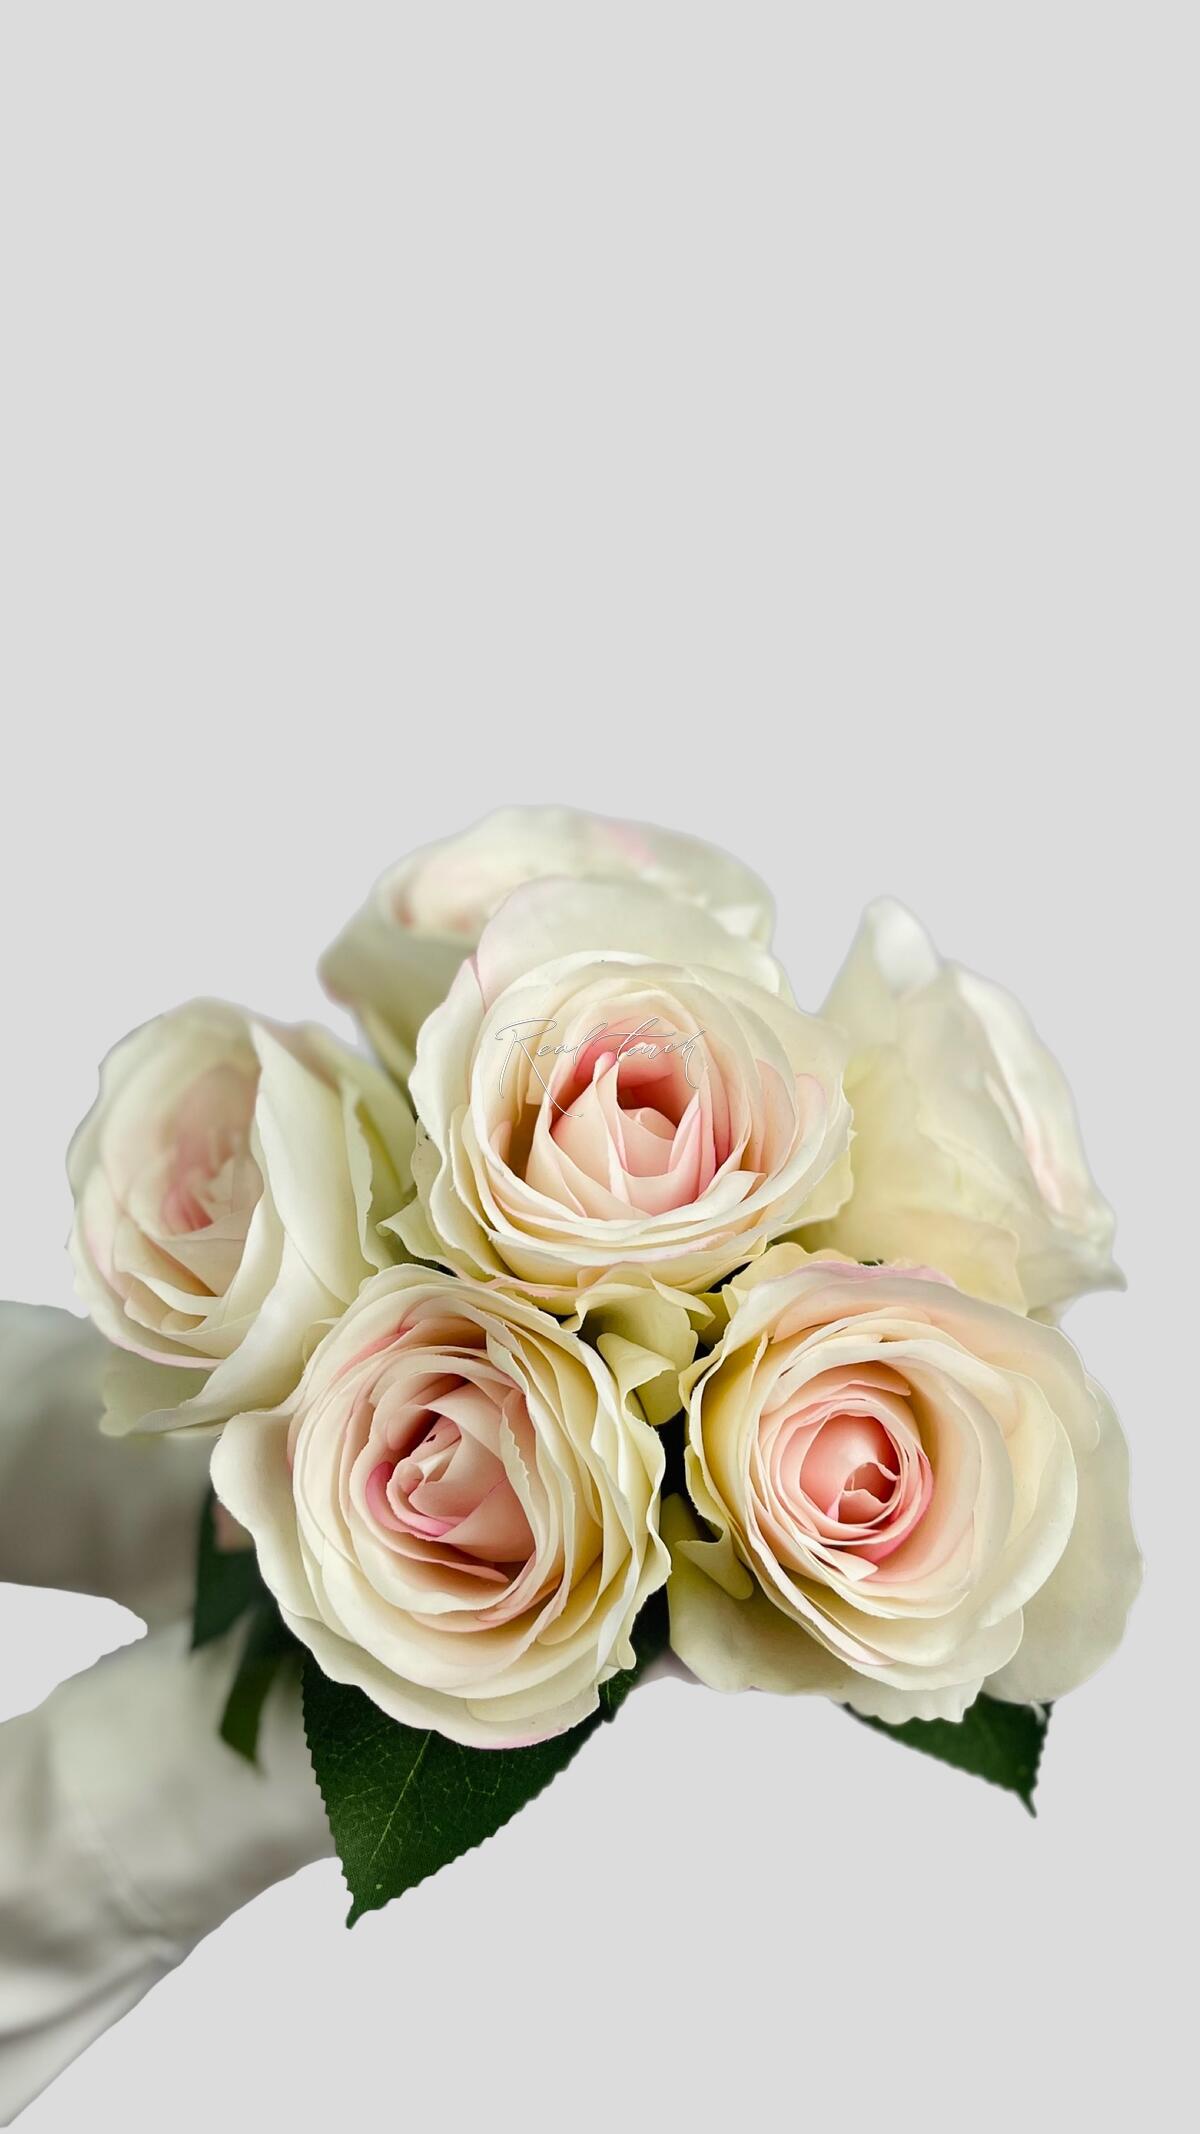 Northlight 26 Real Touch Light Pink Rose Stems 6ct